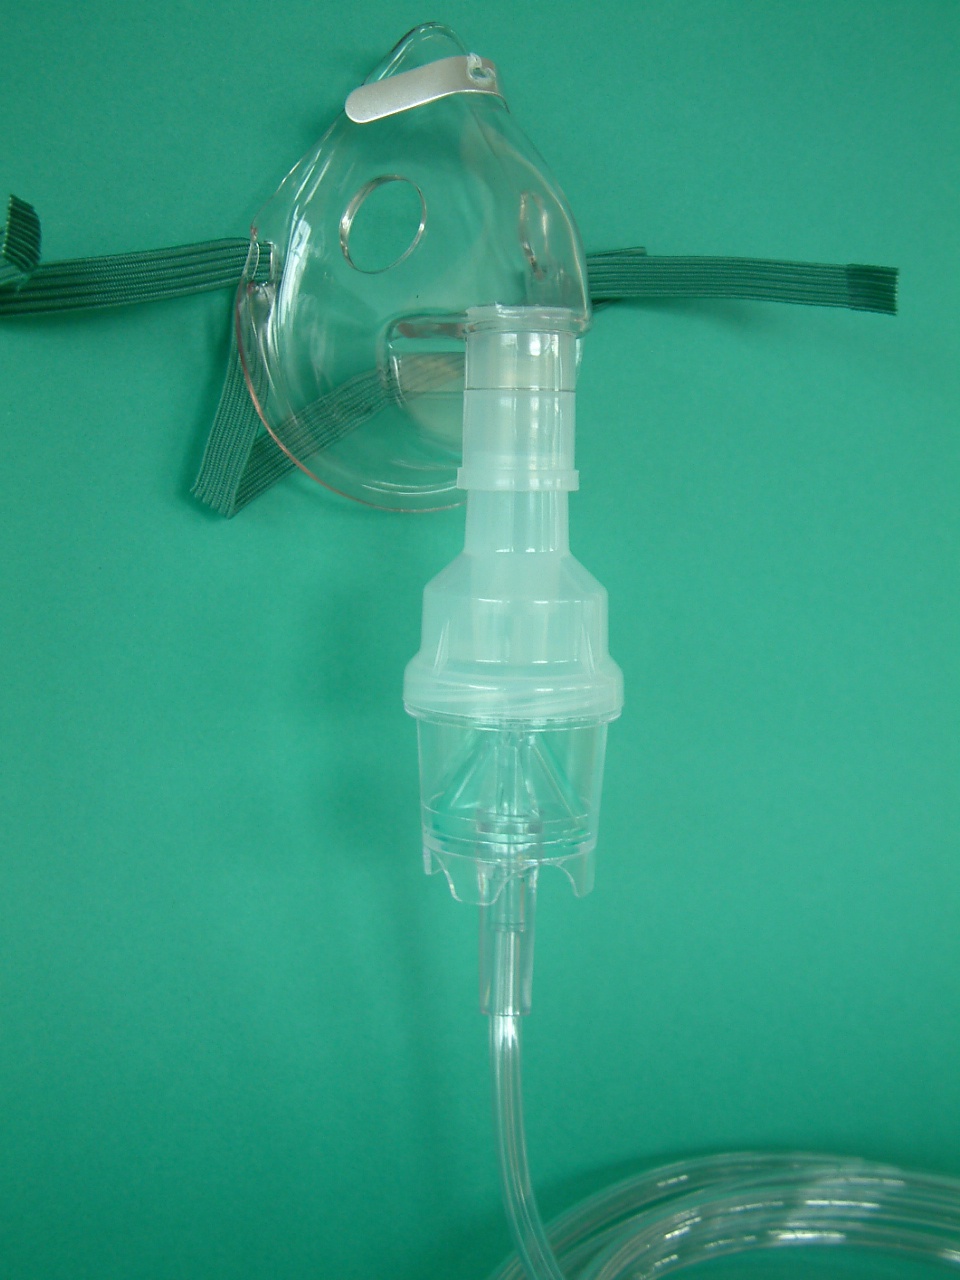 8906750 - Salter Series 8900 Nebuliser with Paediatric Mask & 2.1m (7ft) Safety Tubing